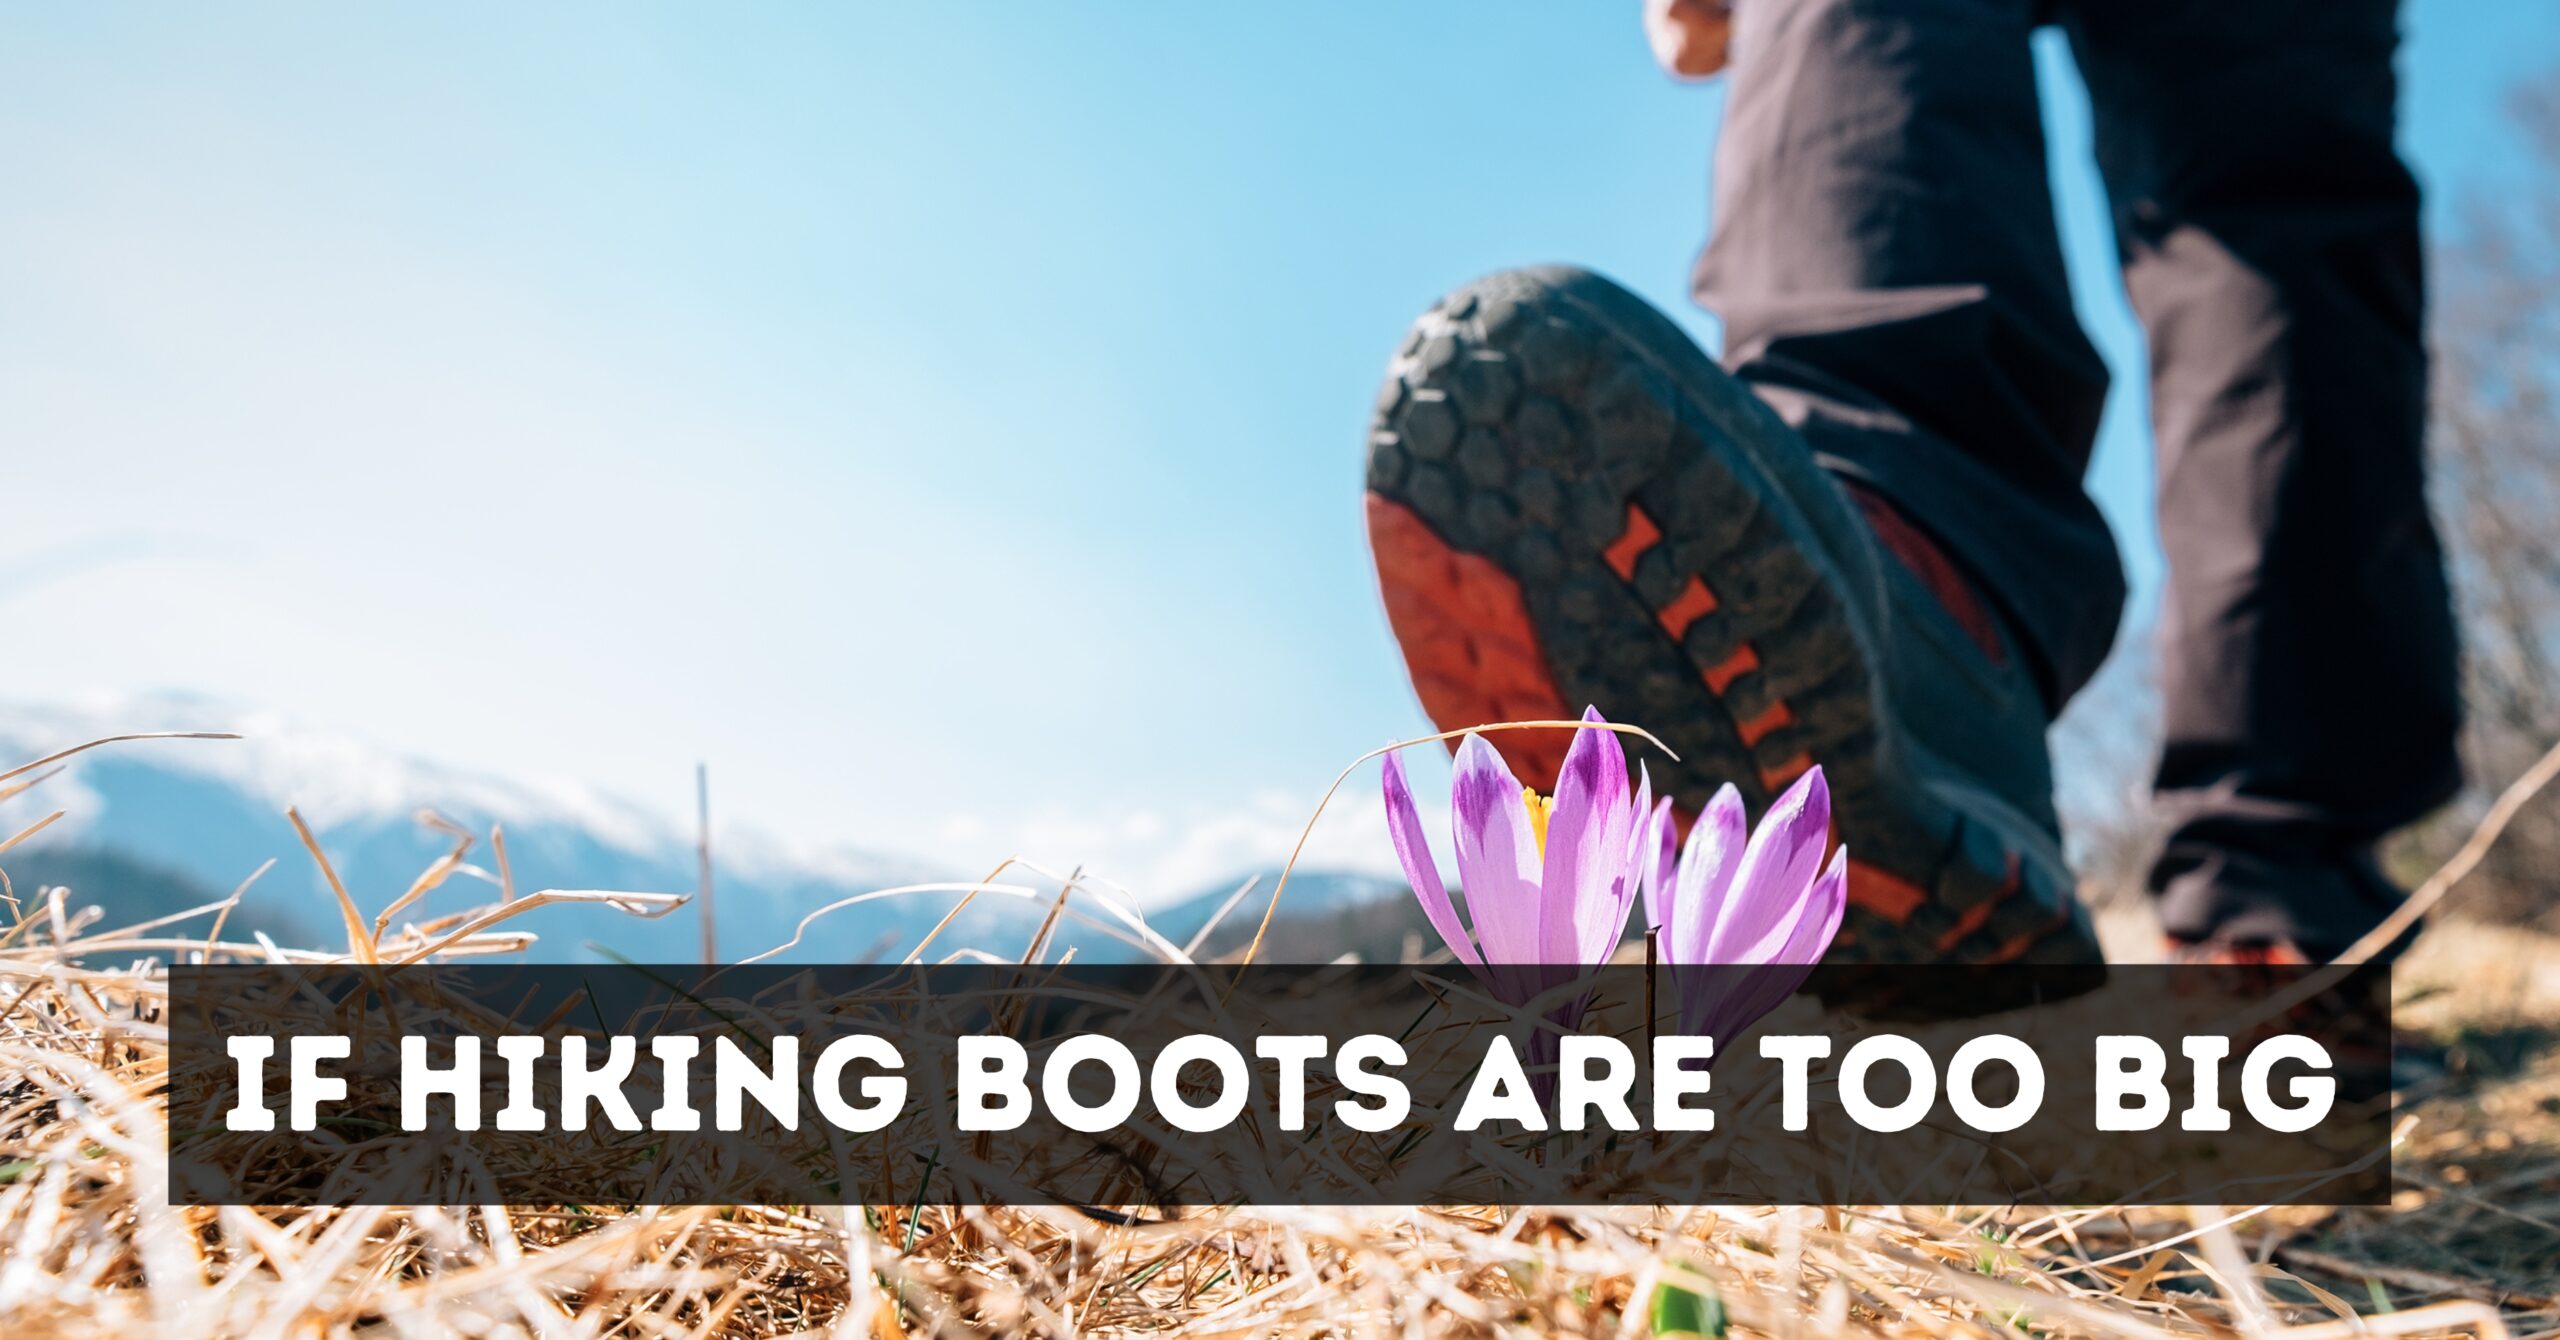 How To Tell If Hiking Boots Are Too Big